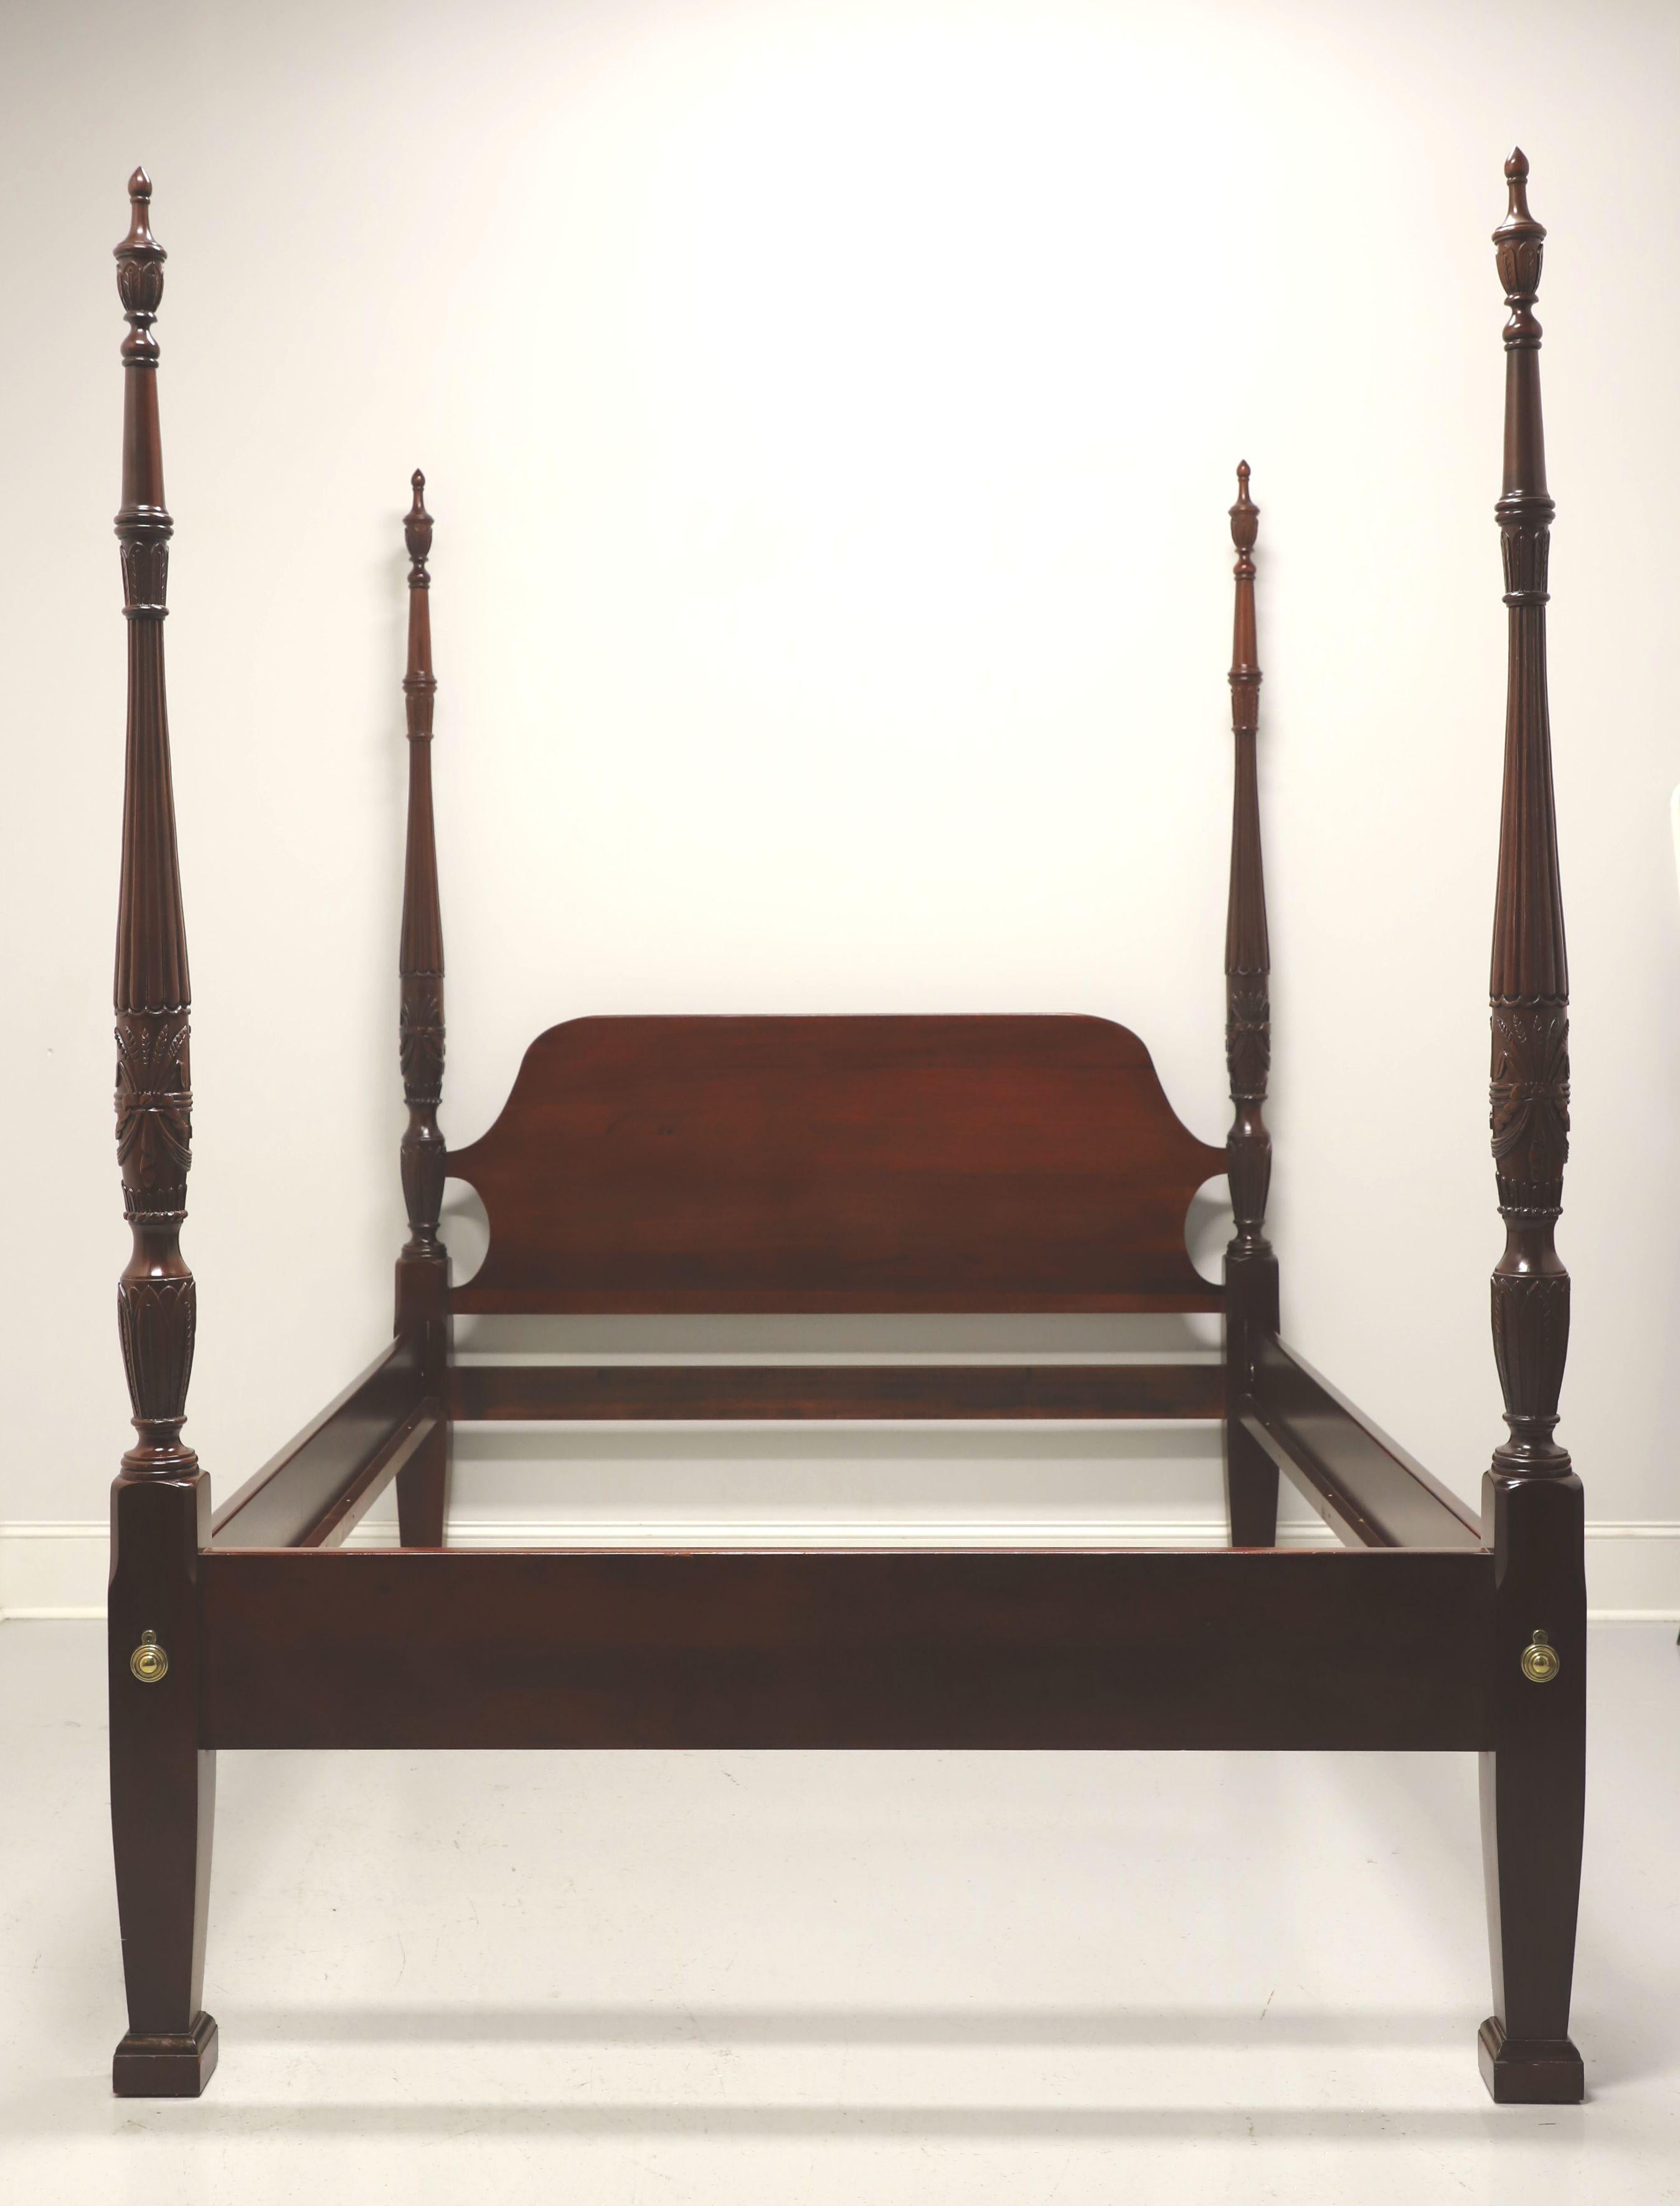 A Chippendale style queen size poster bed by Link-Taylor. Solid heirloom mahogany with arched headboard, four rice carved posts with finials, brass hardware to footboard, bolt held side rails with wood bracers and three wood slats for mattress